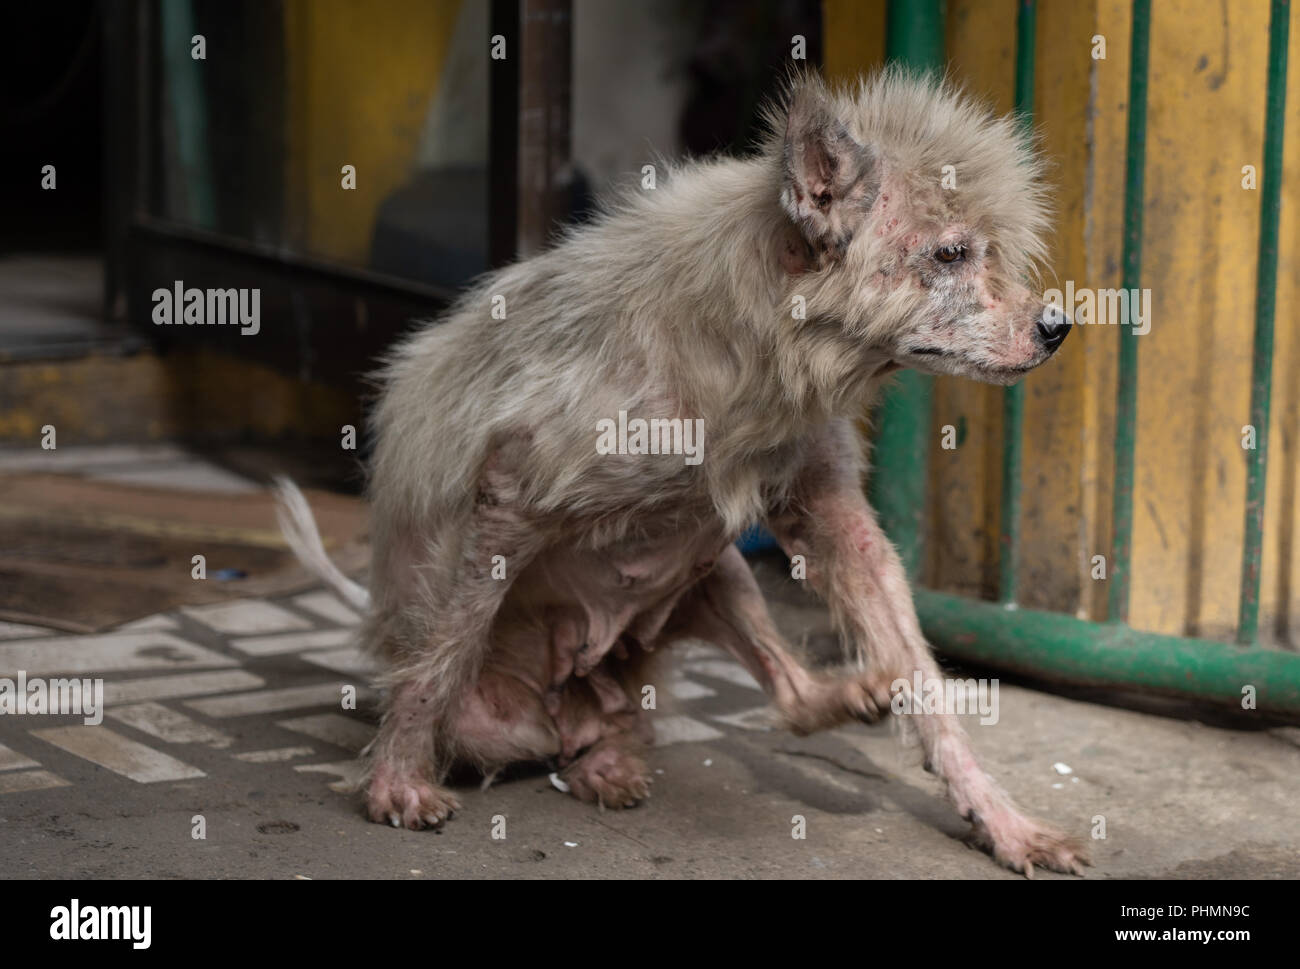 A dog in the Philippines showing signs of skin disease. Stock Photo